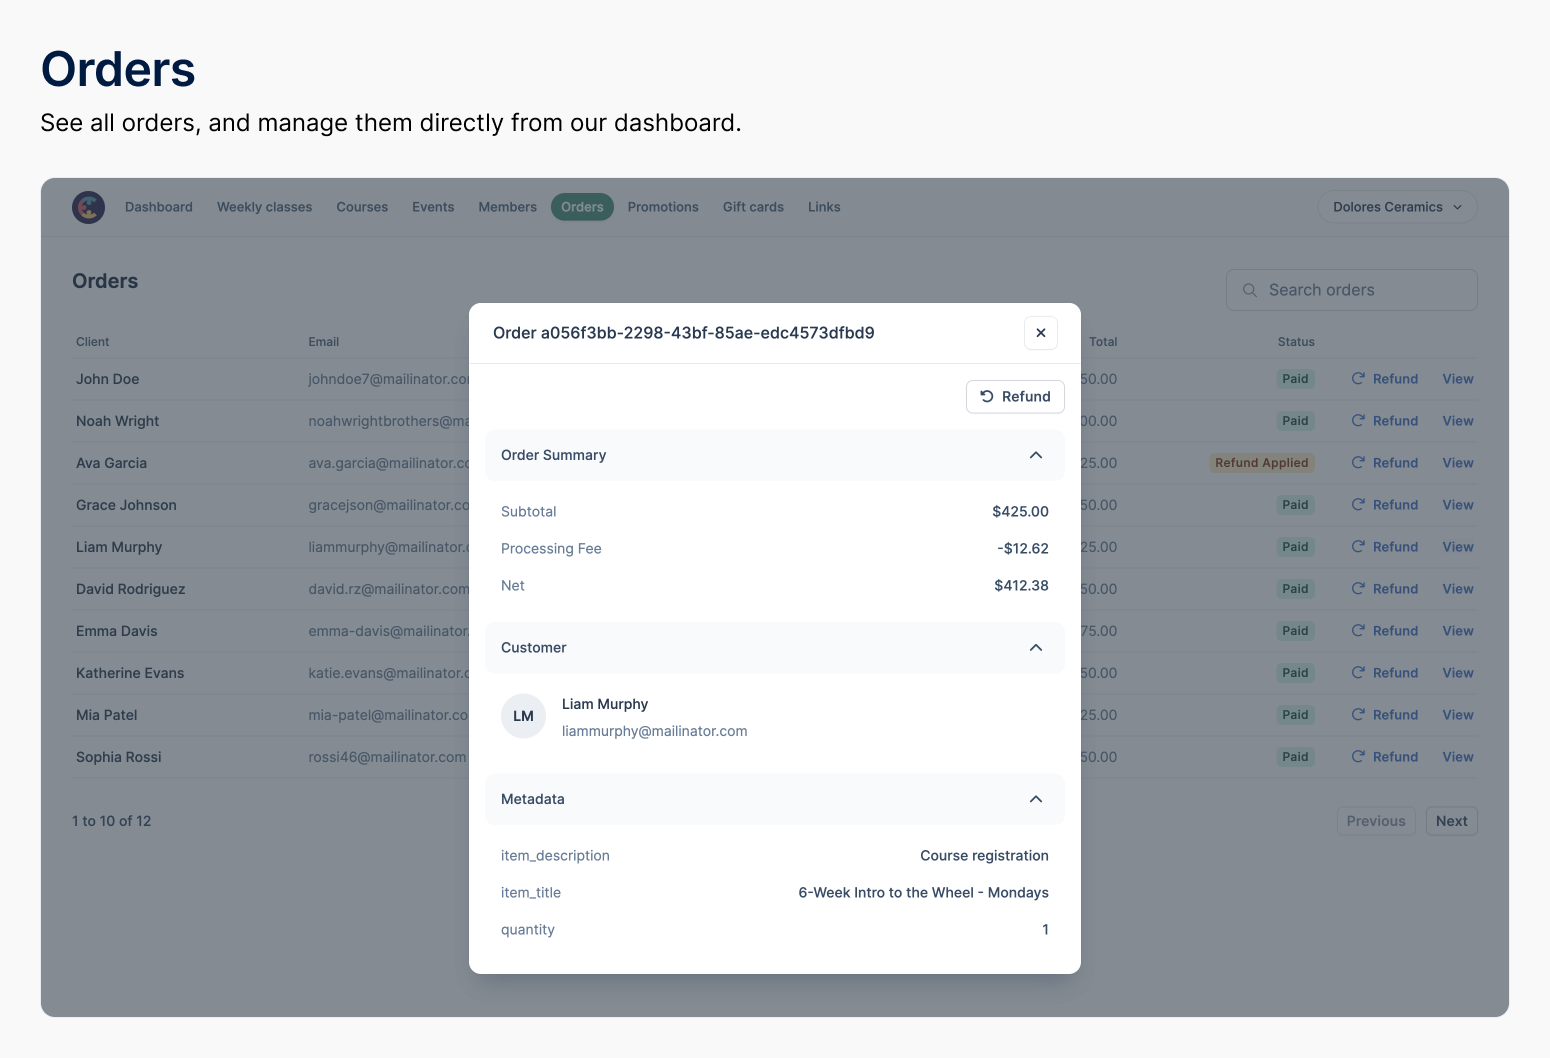 See all orders and manage them directly from your admin dashboard.